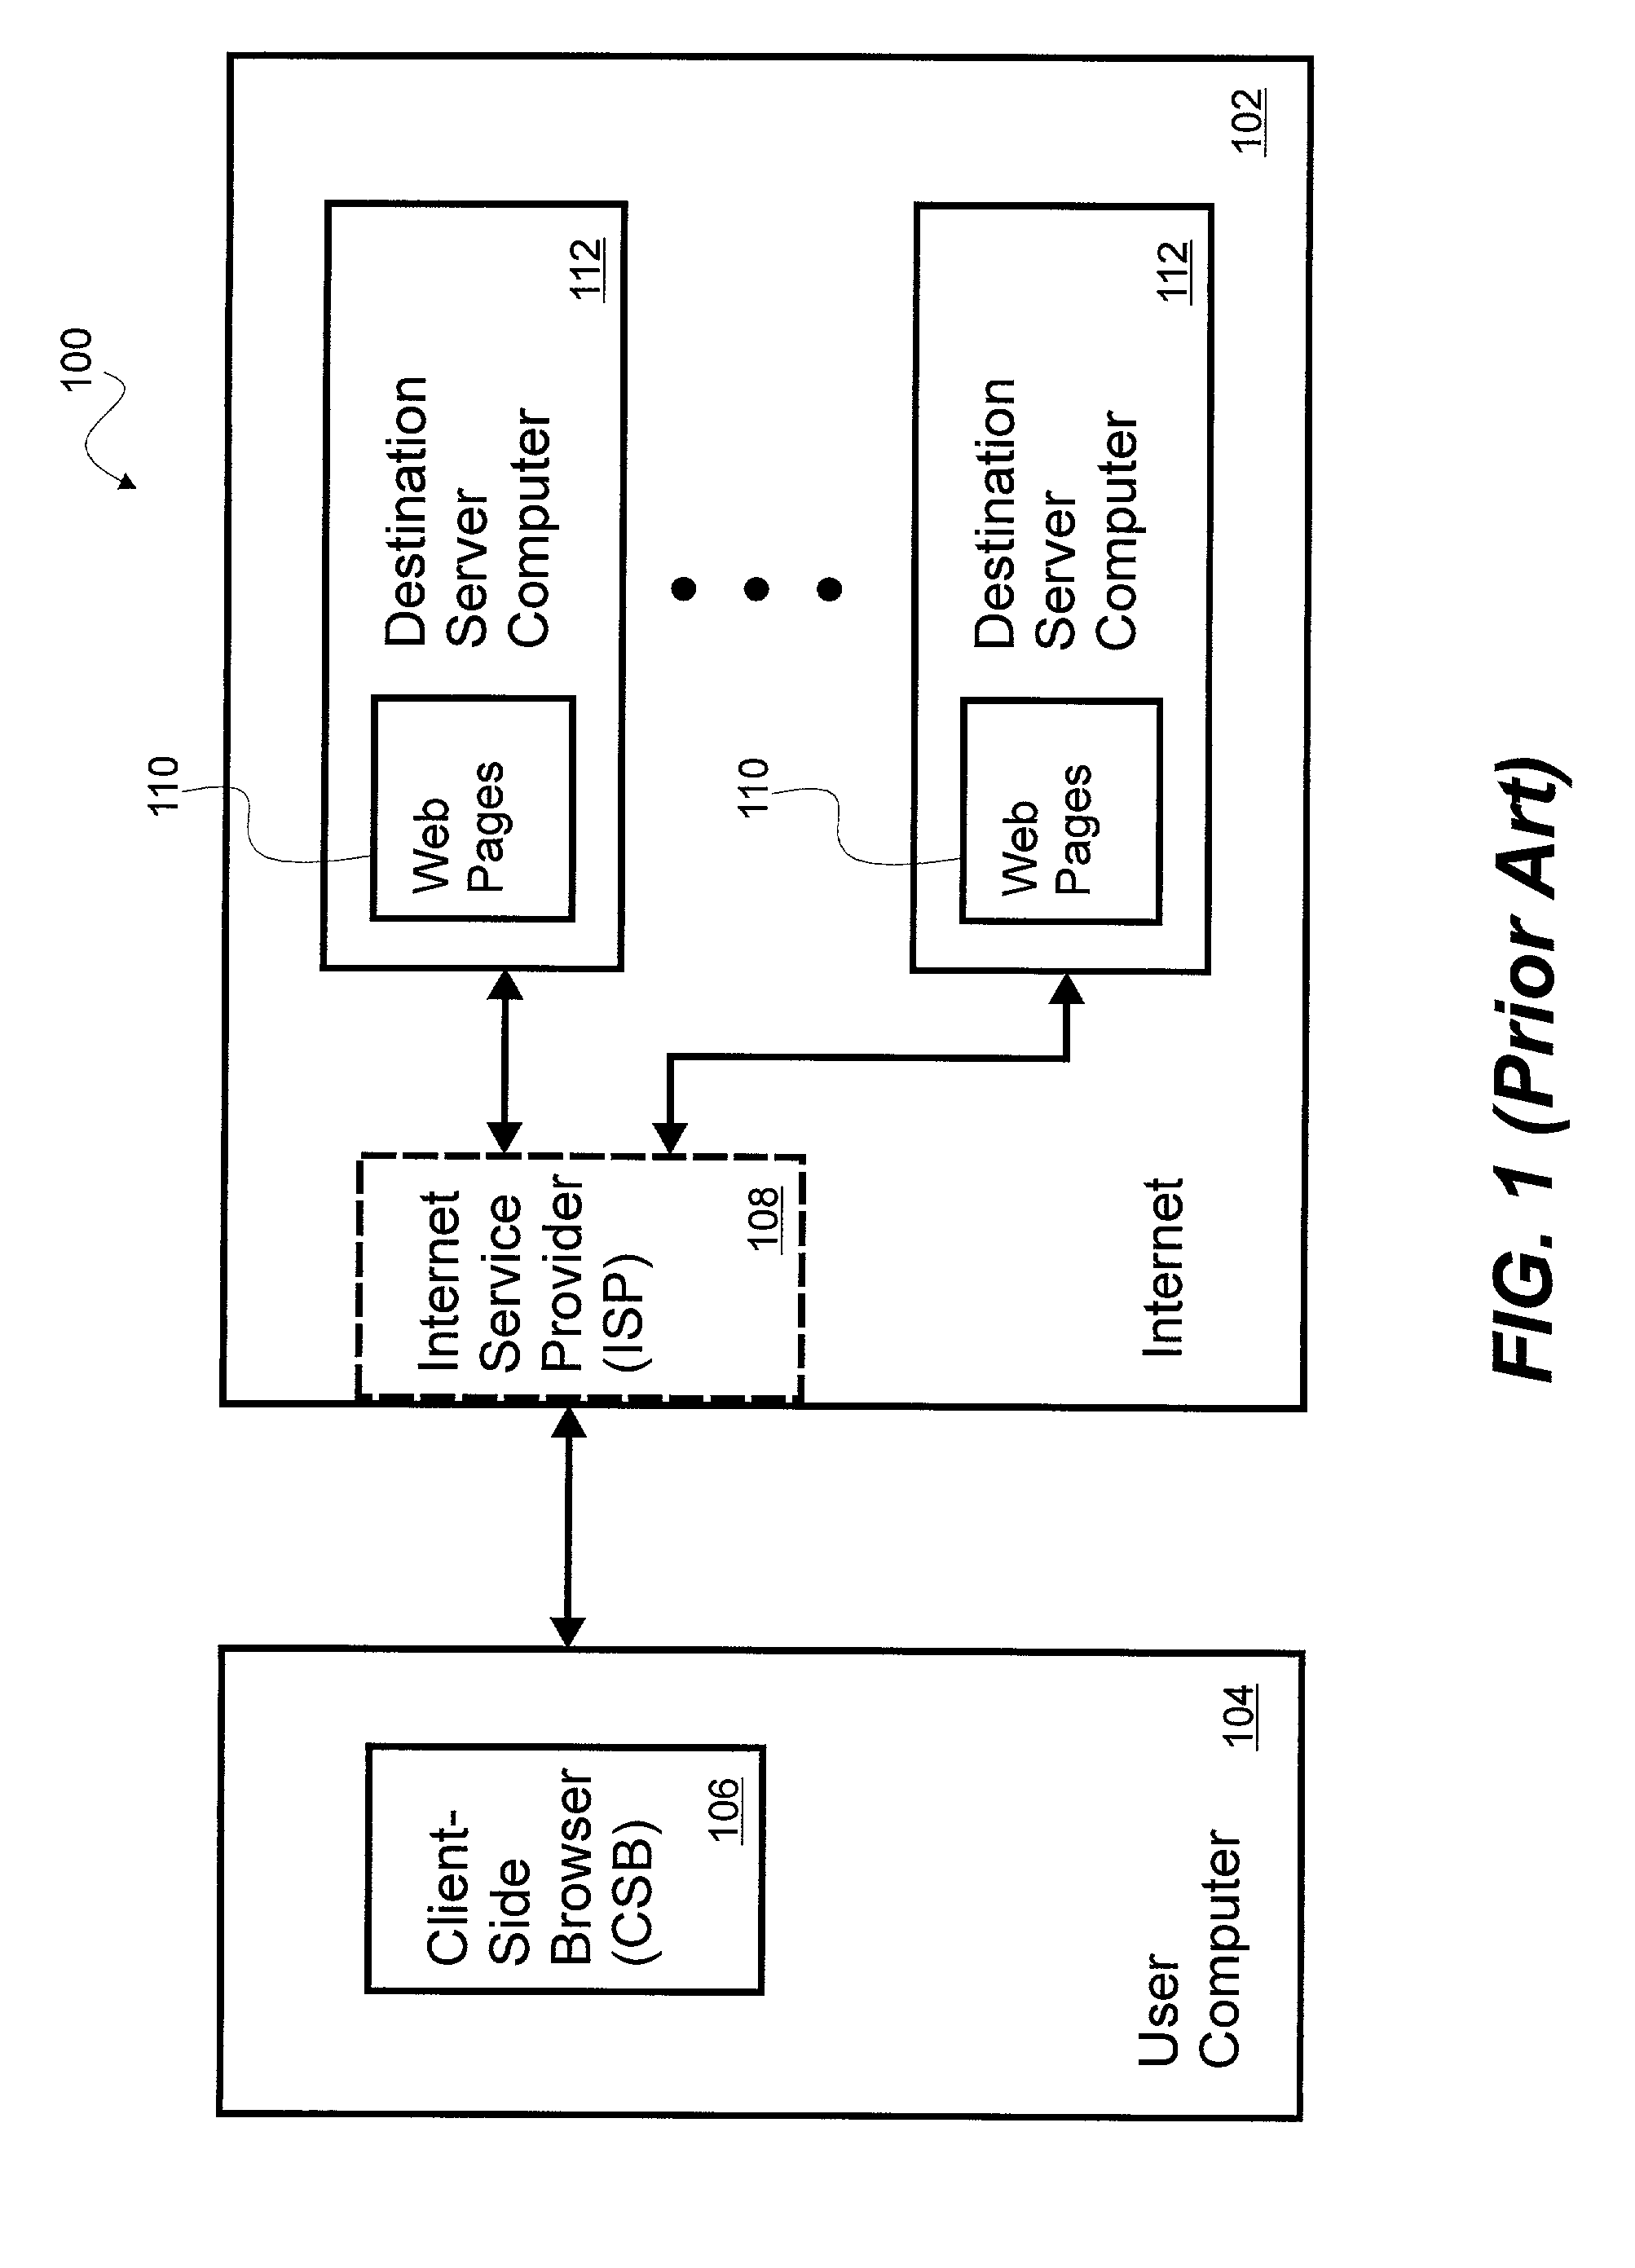 System and method for a server-side browser including markup language graphical user interface, dynamic markup language rewriter engine and profile engine